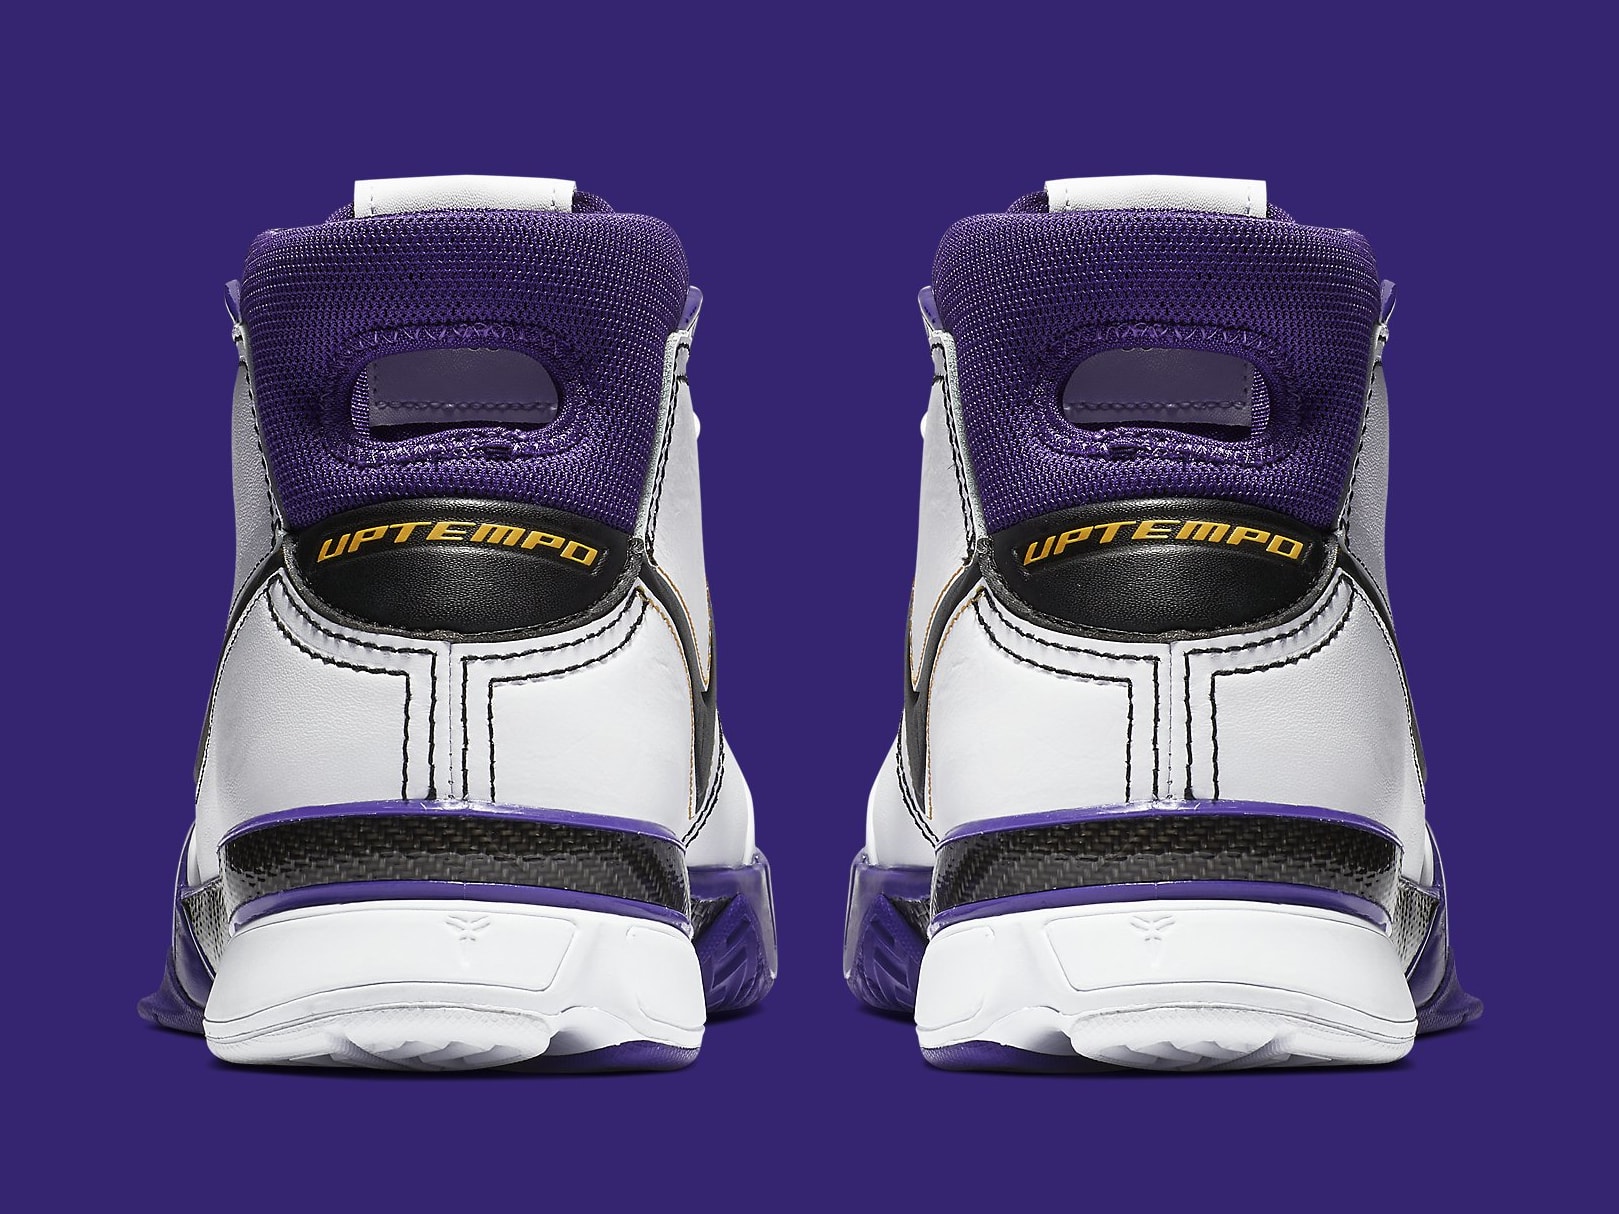 Nike commemorating Kobe's 81-point game with new sneaker